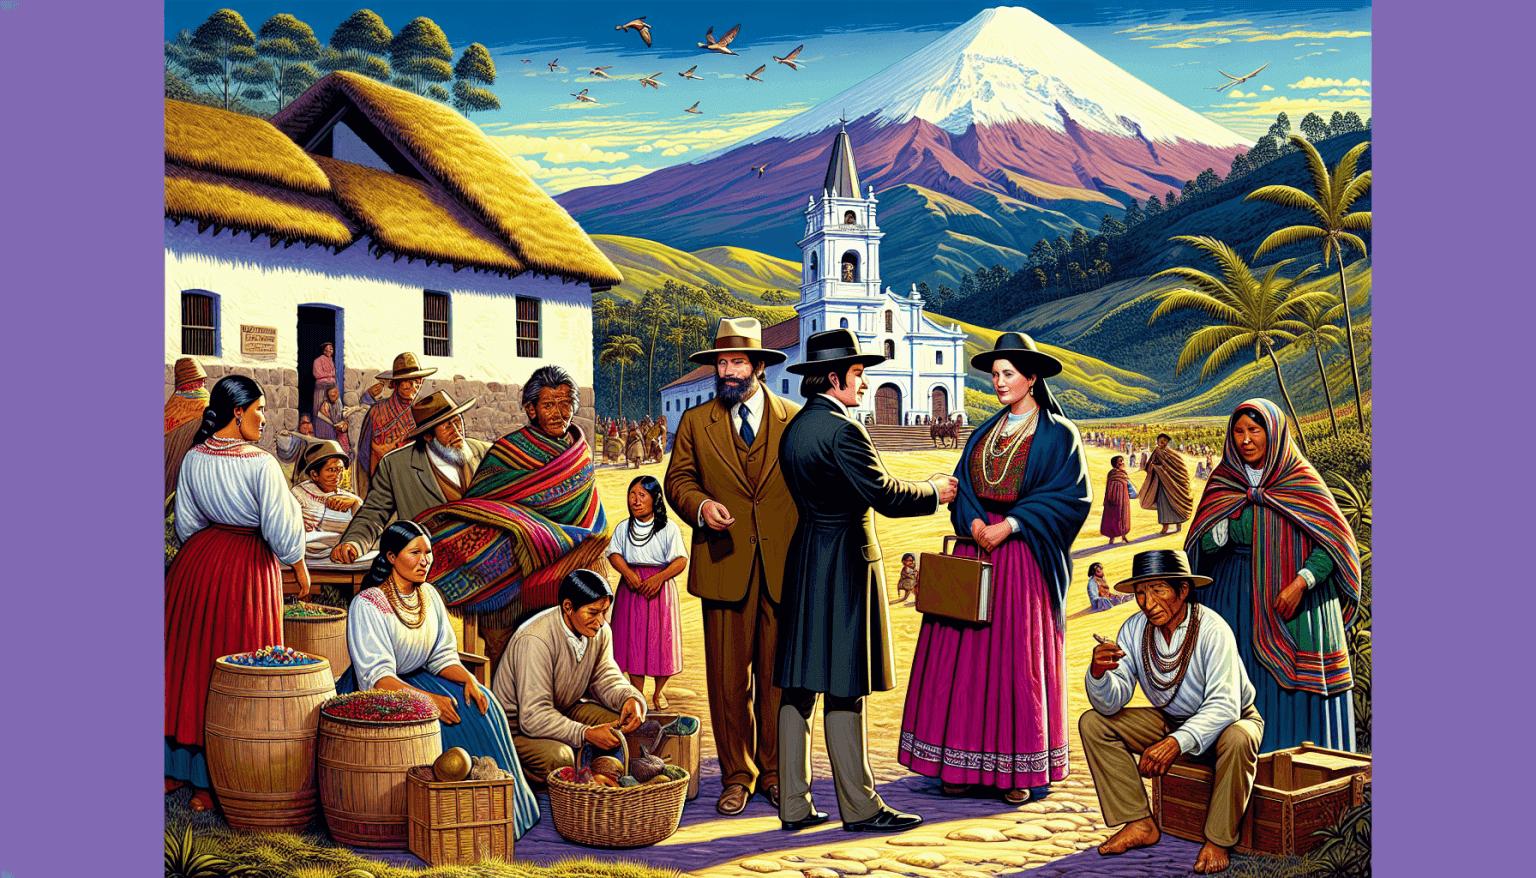 An illustrative scene showing early Christian missionaries arriving in Ecuador, exchanging cultural symbols and teachings with indigenous people amidst the lush Andean landscapes, with a traditional E